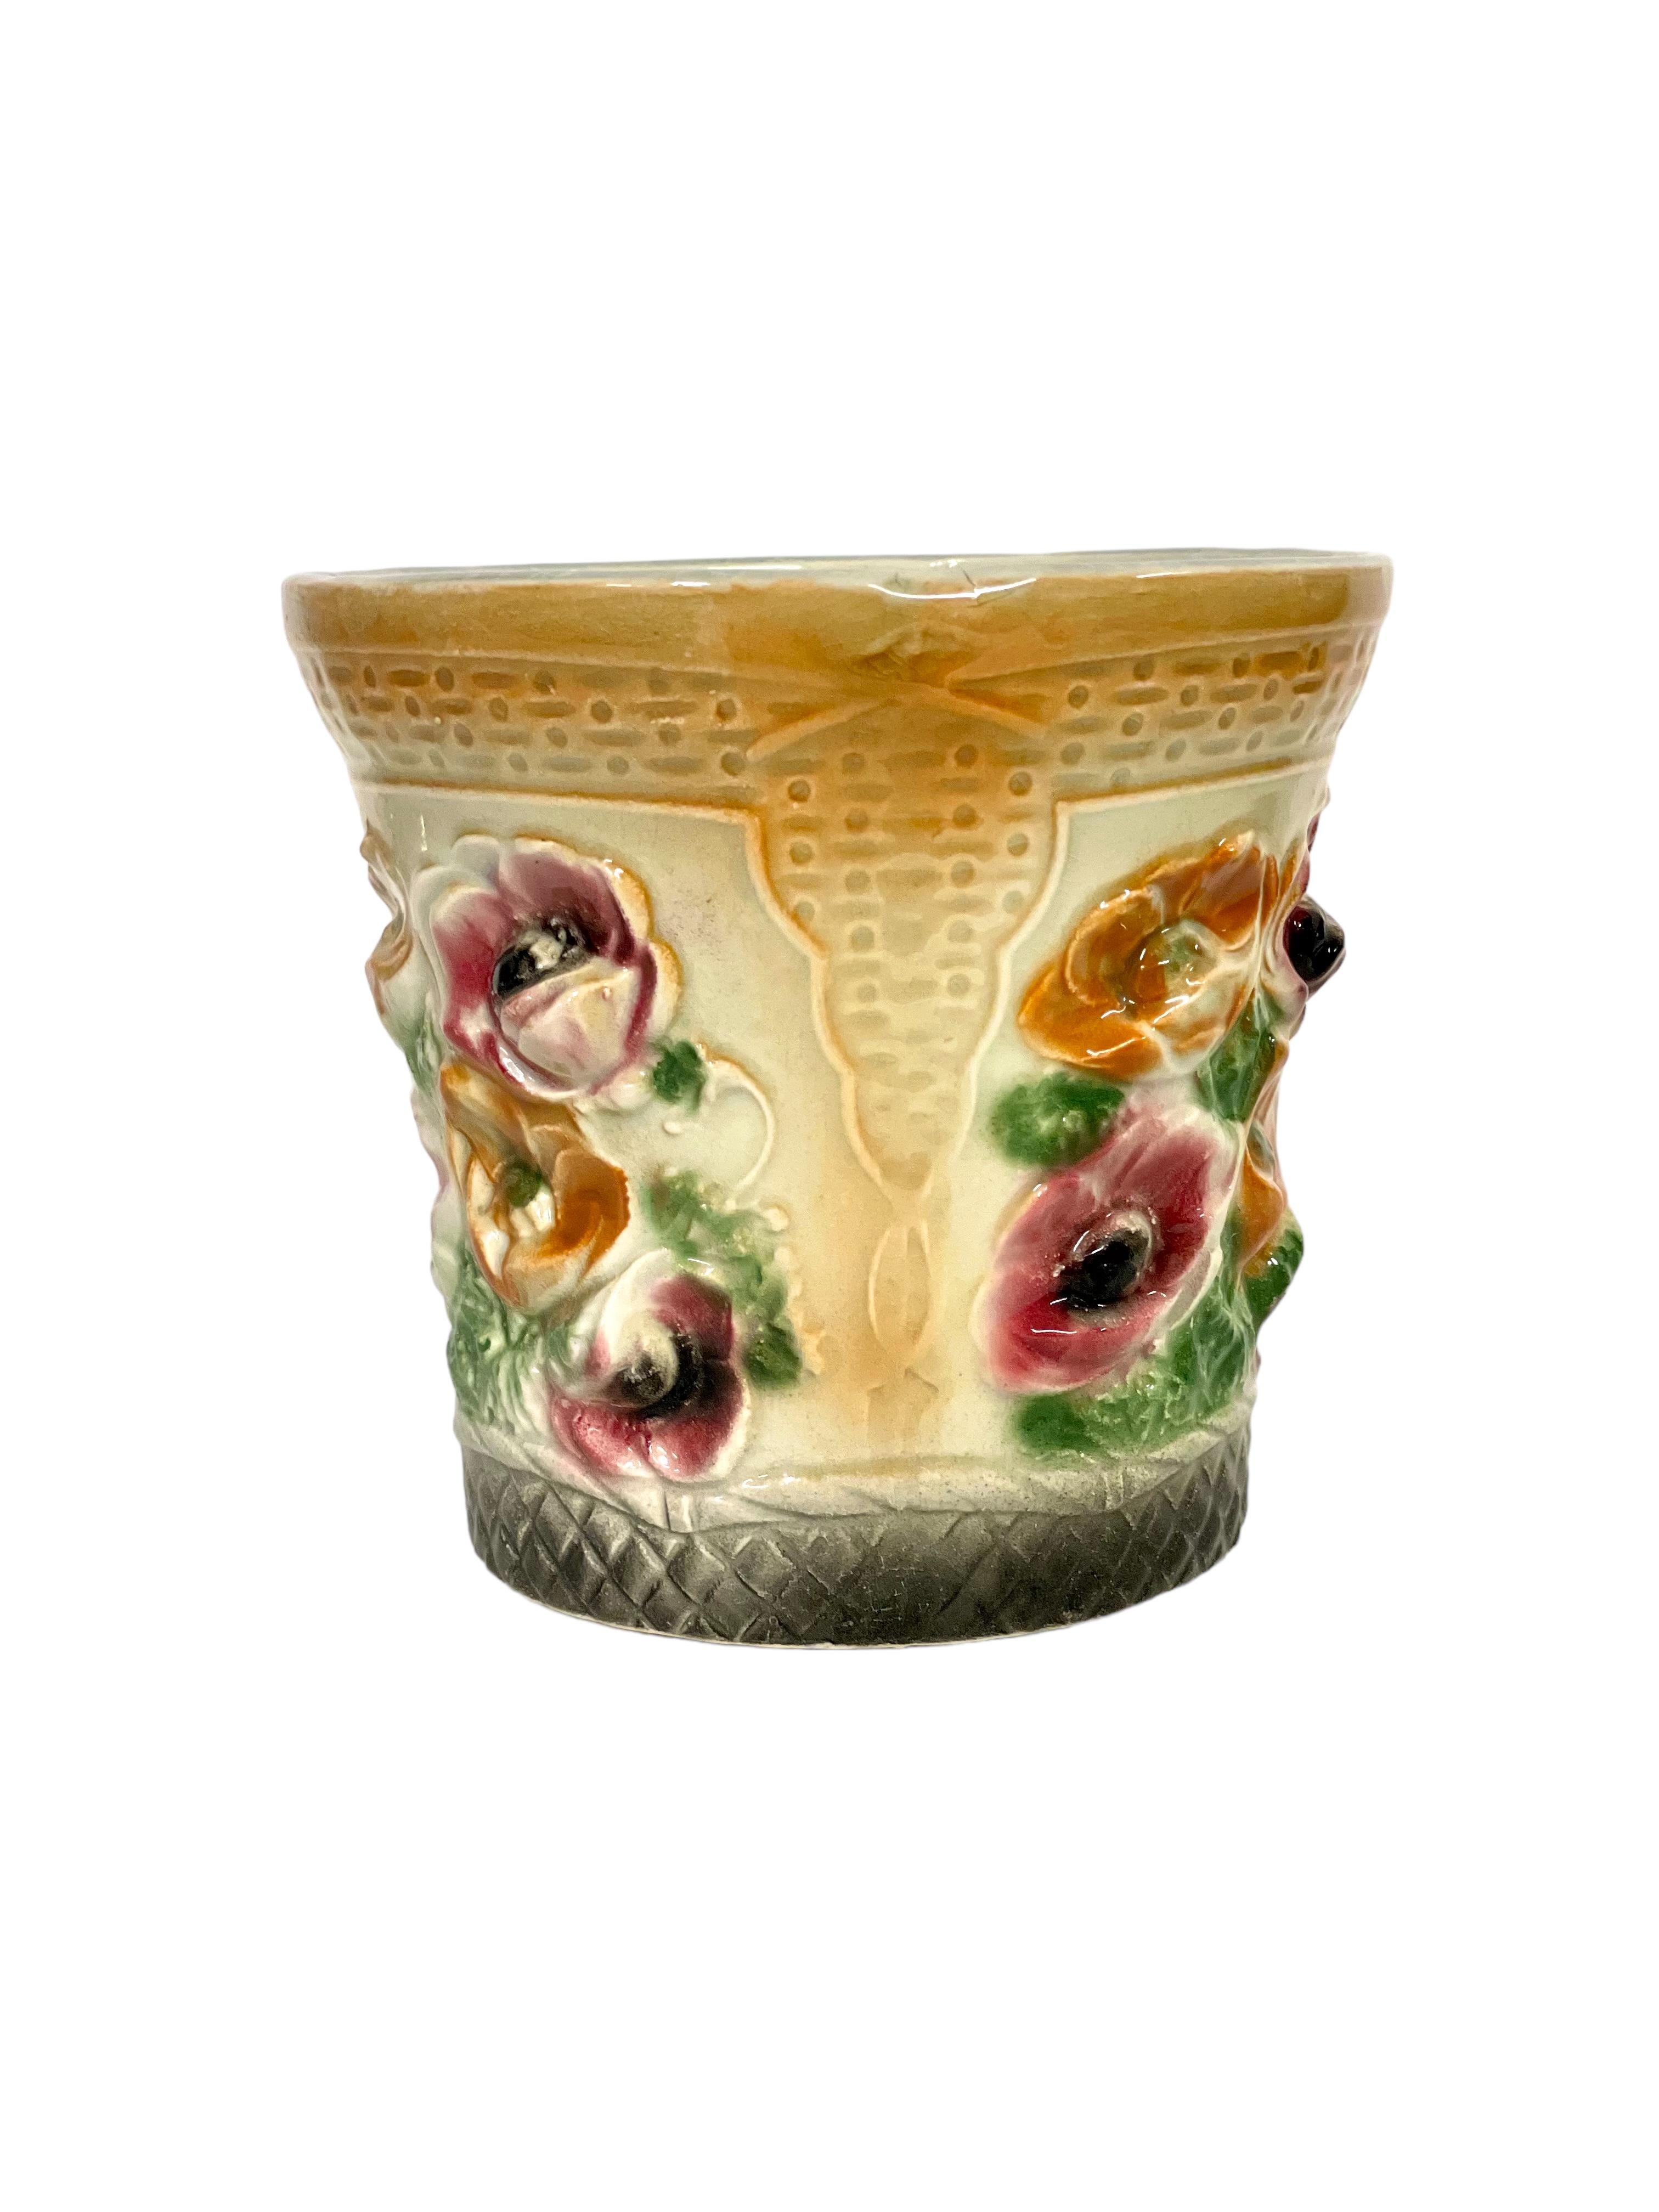 A very colourful 19th century Majolica cache pot, vividly decorated with an entrancing motif of flowering poppies and foliage, and set against a yellow background imprinted with an intricate basketweave texture. Majolica earthenware is noted for its